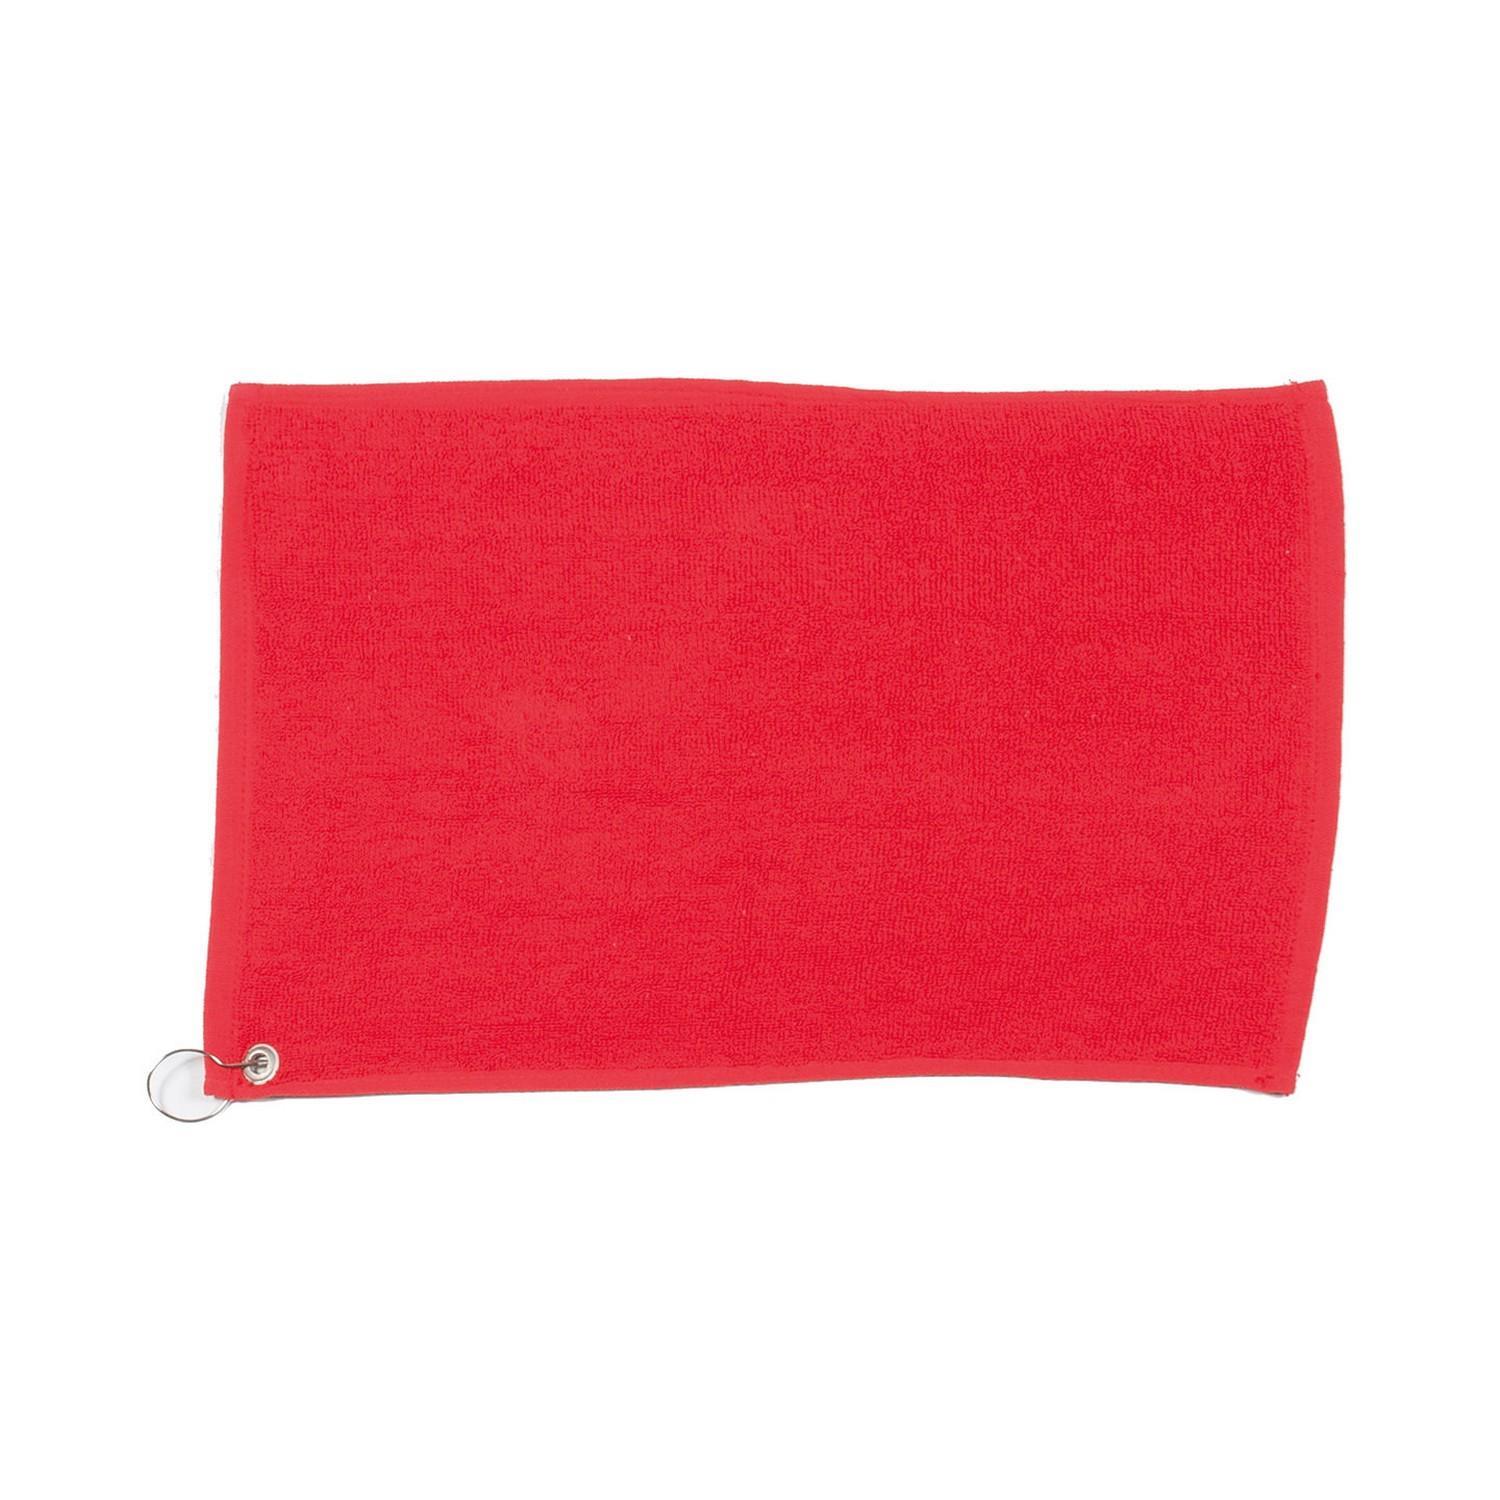 Towel City Luxury Golf Towel (Red) (One Size)